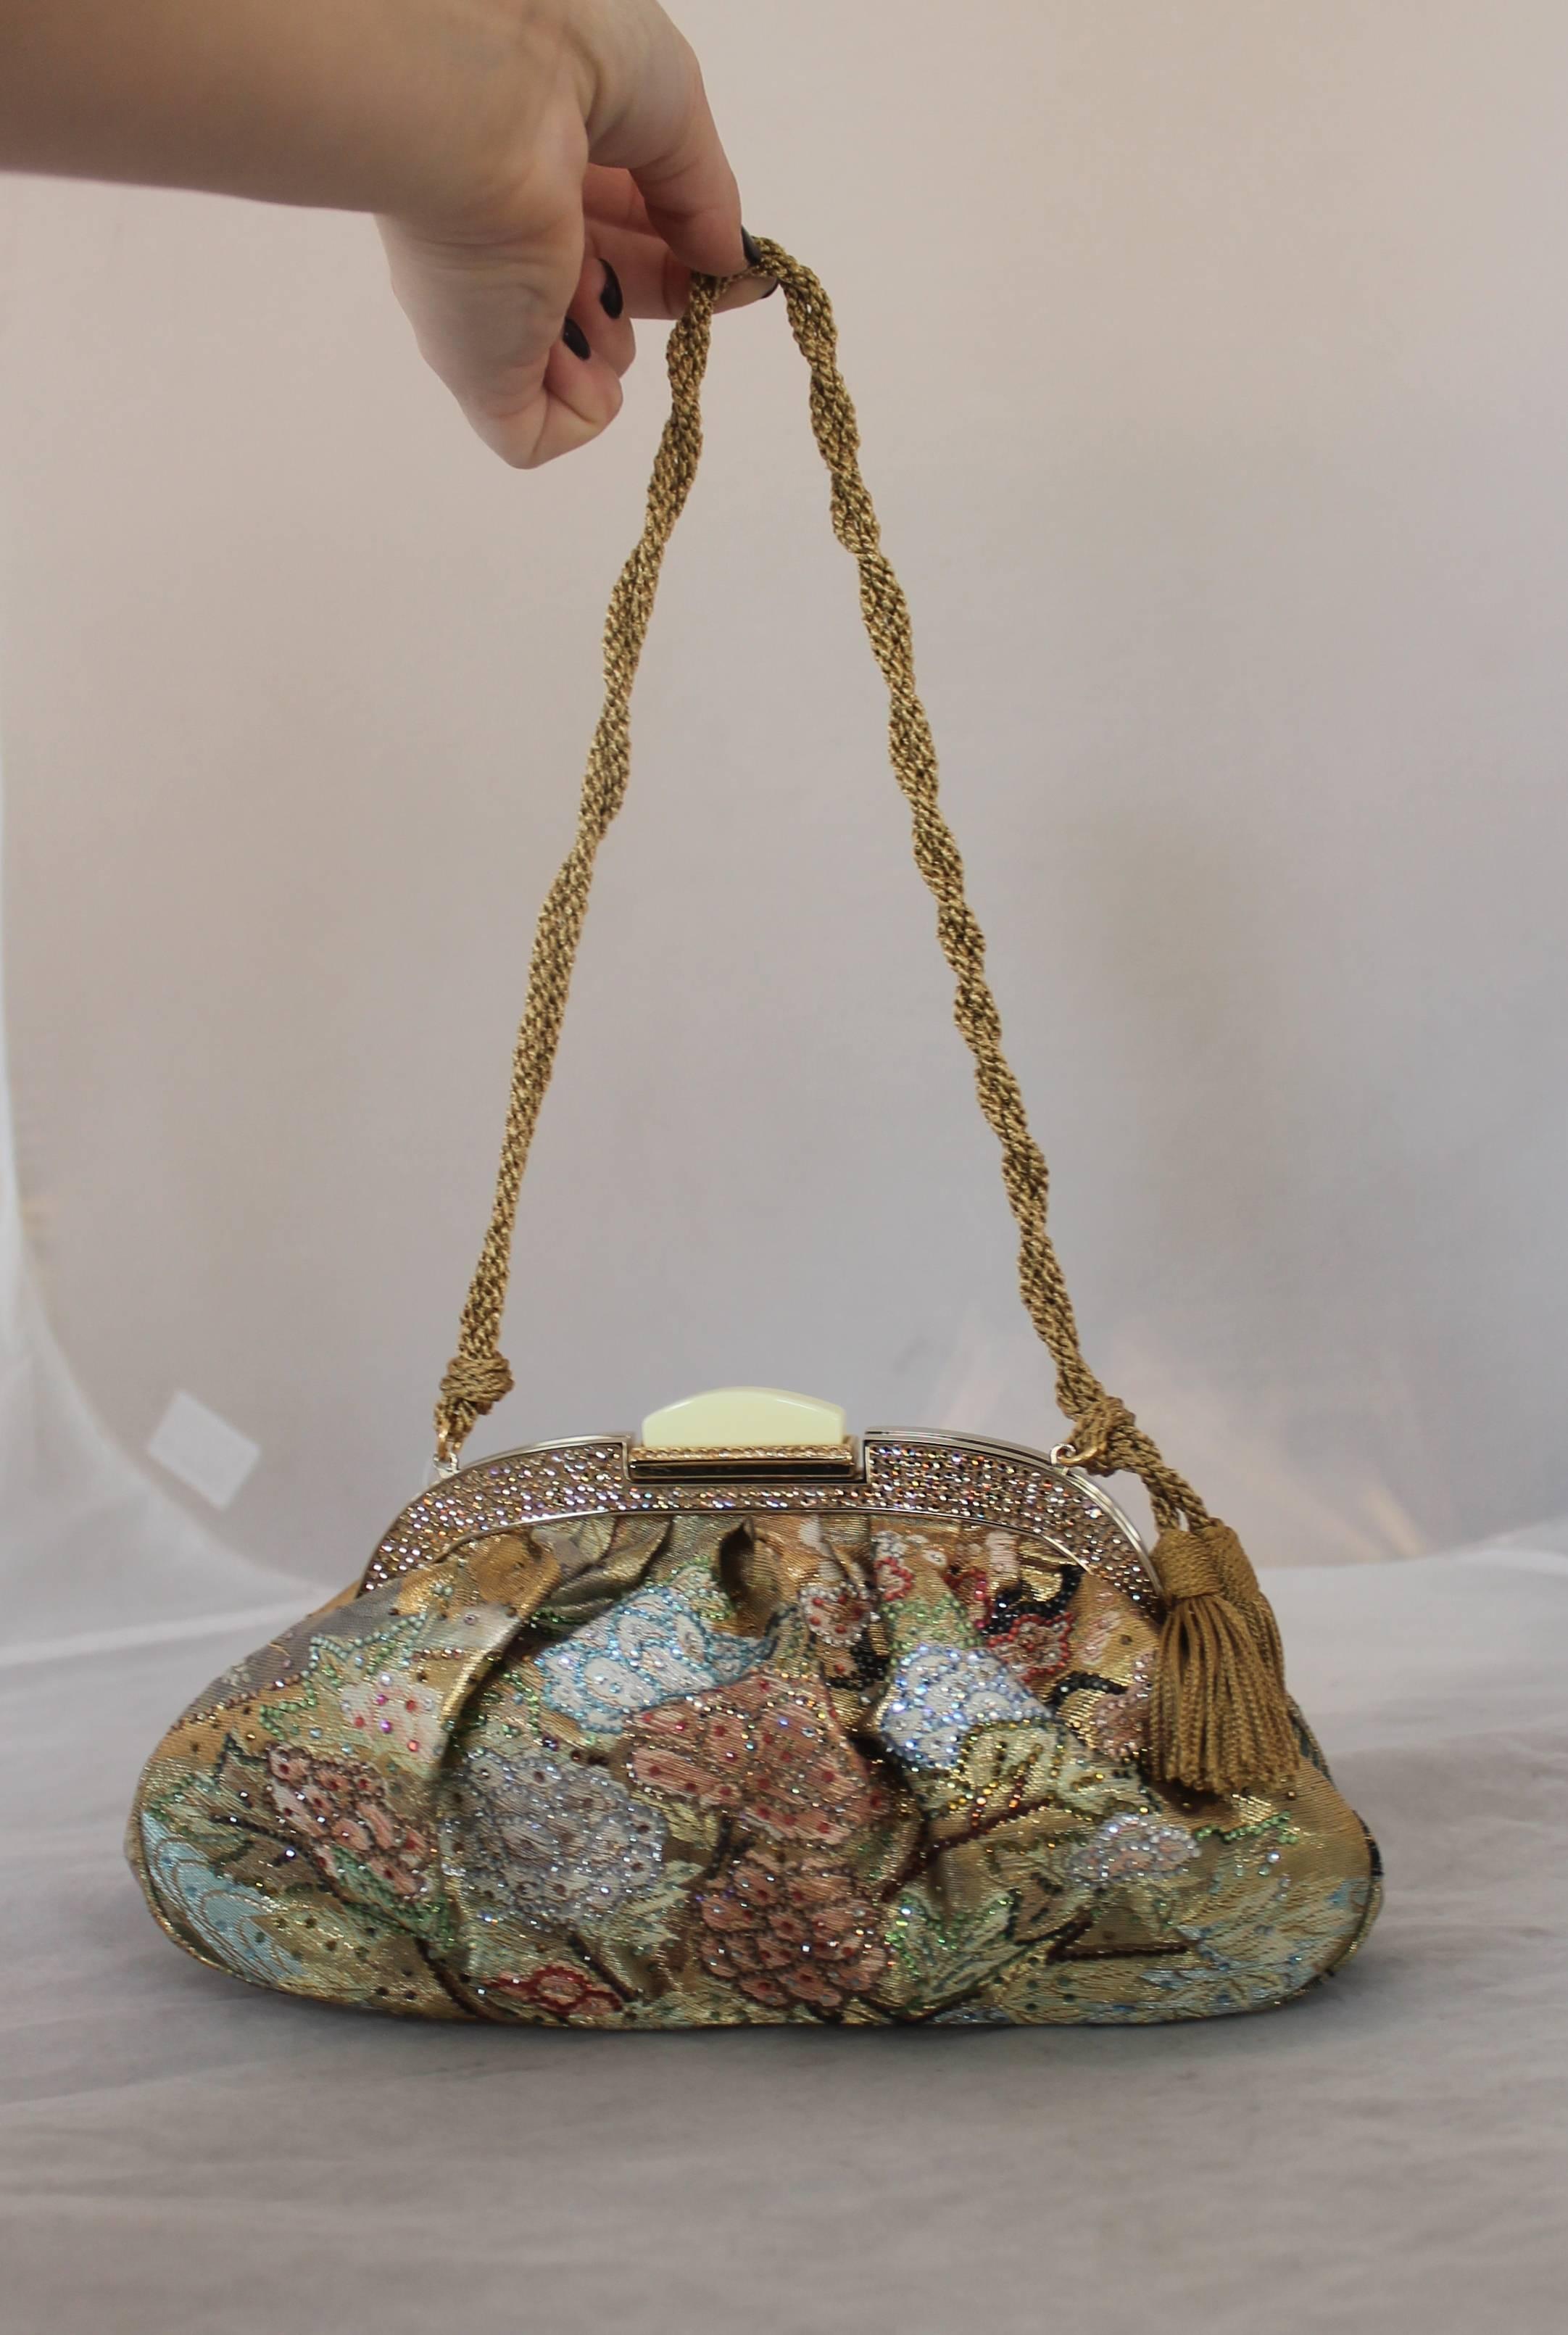 Judith Leiber Collector's Edition Multi Pastels Brocade Bag with Rhinestone Flowers & Rope Strap and tassel. This piece is in excellent condition still has the original tag attached. It comes with a duster and booklet. The lining is also a deep